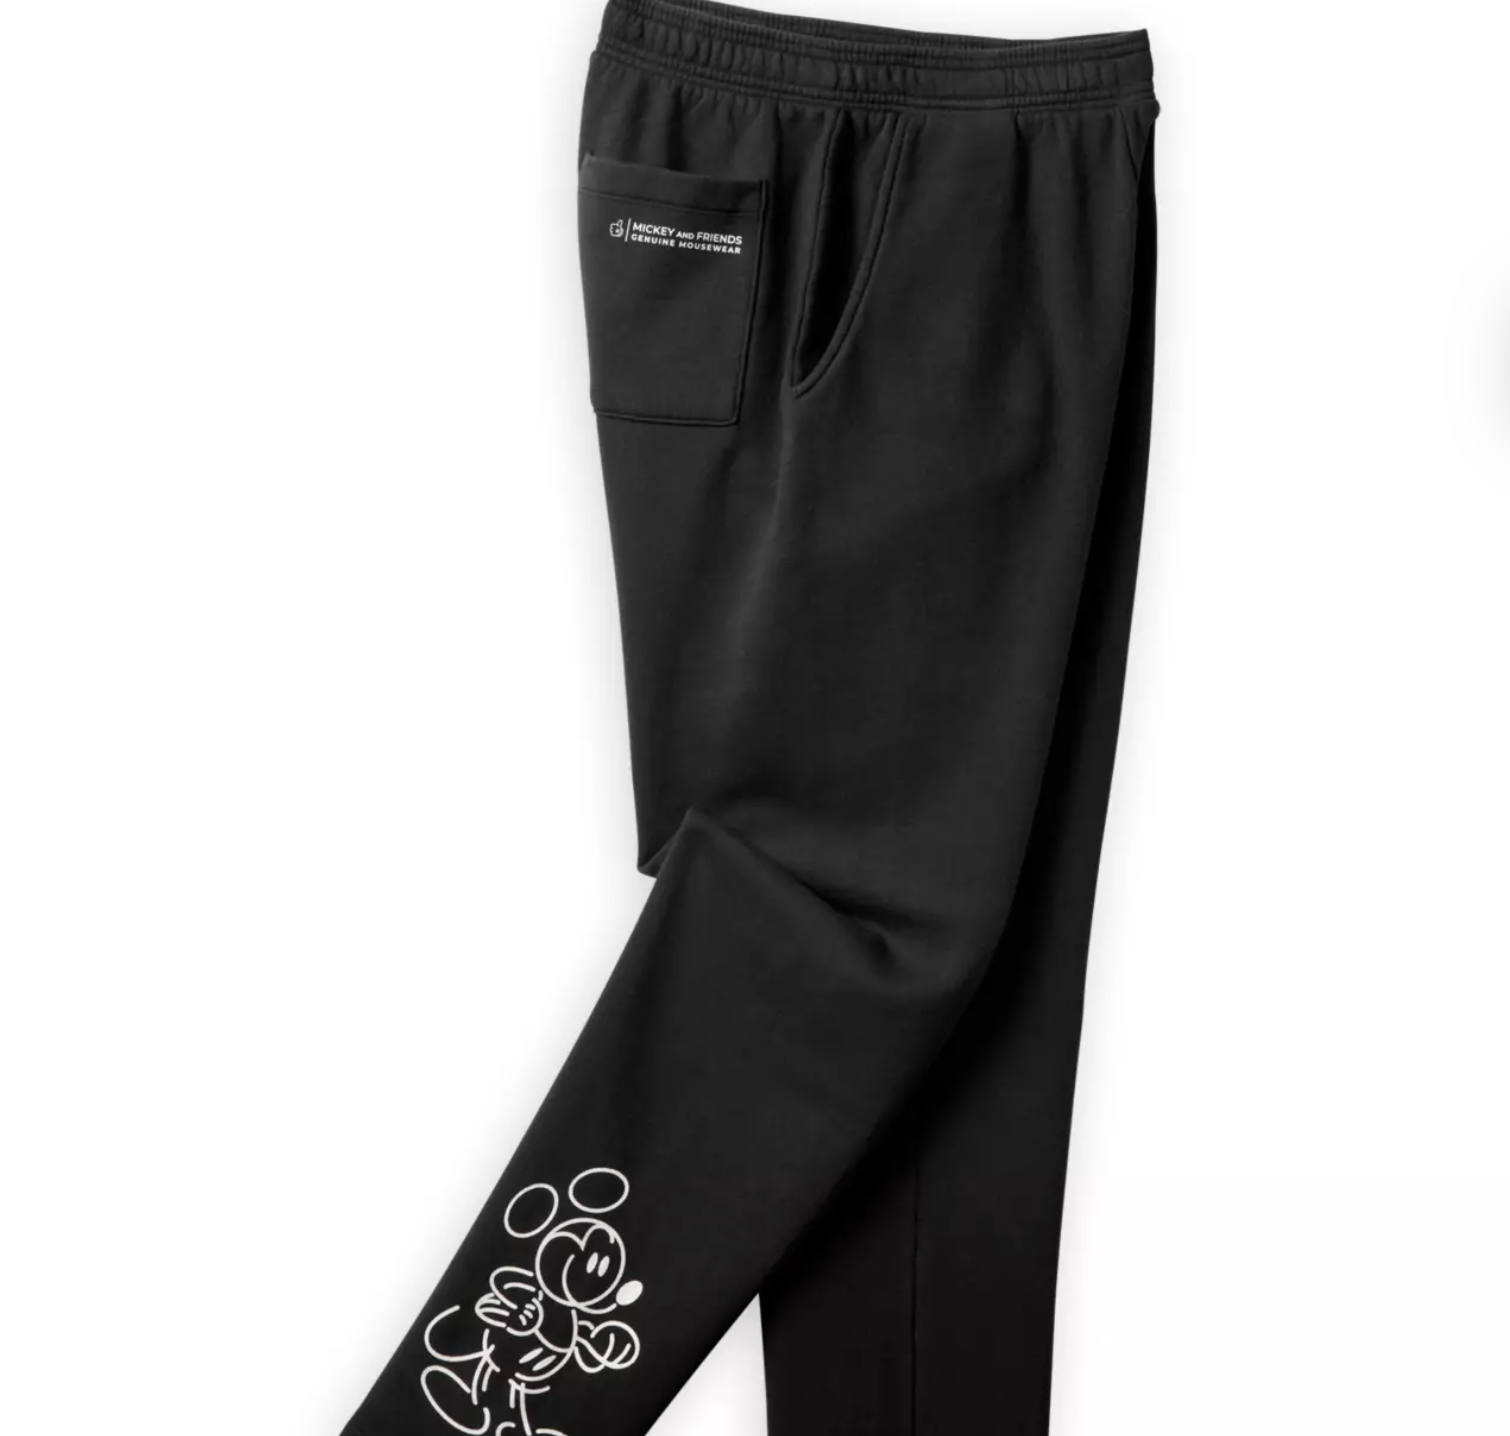 https://allears.net/wp-content/uploads/2023/02/2023-Mickey-Mouse-Black-Genuine-Mousewear-Jogger-Sweatpants-for-Women-shopDisney.png